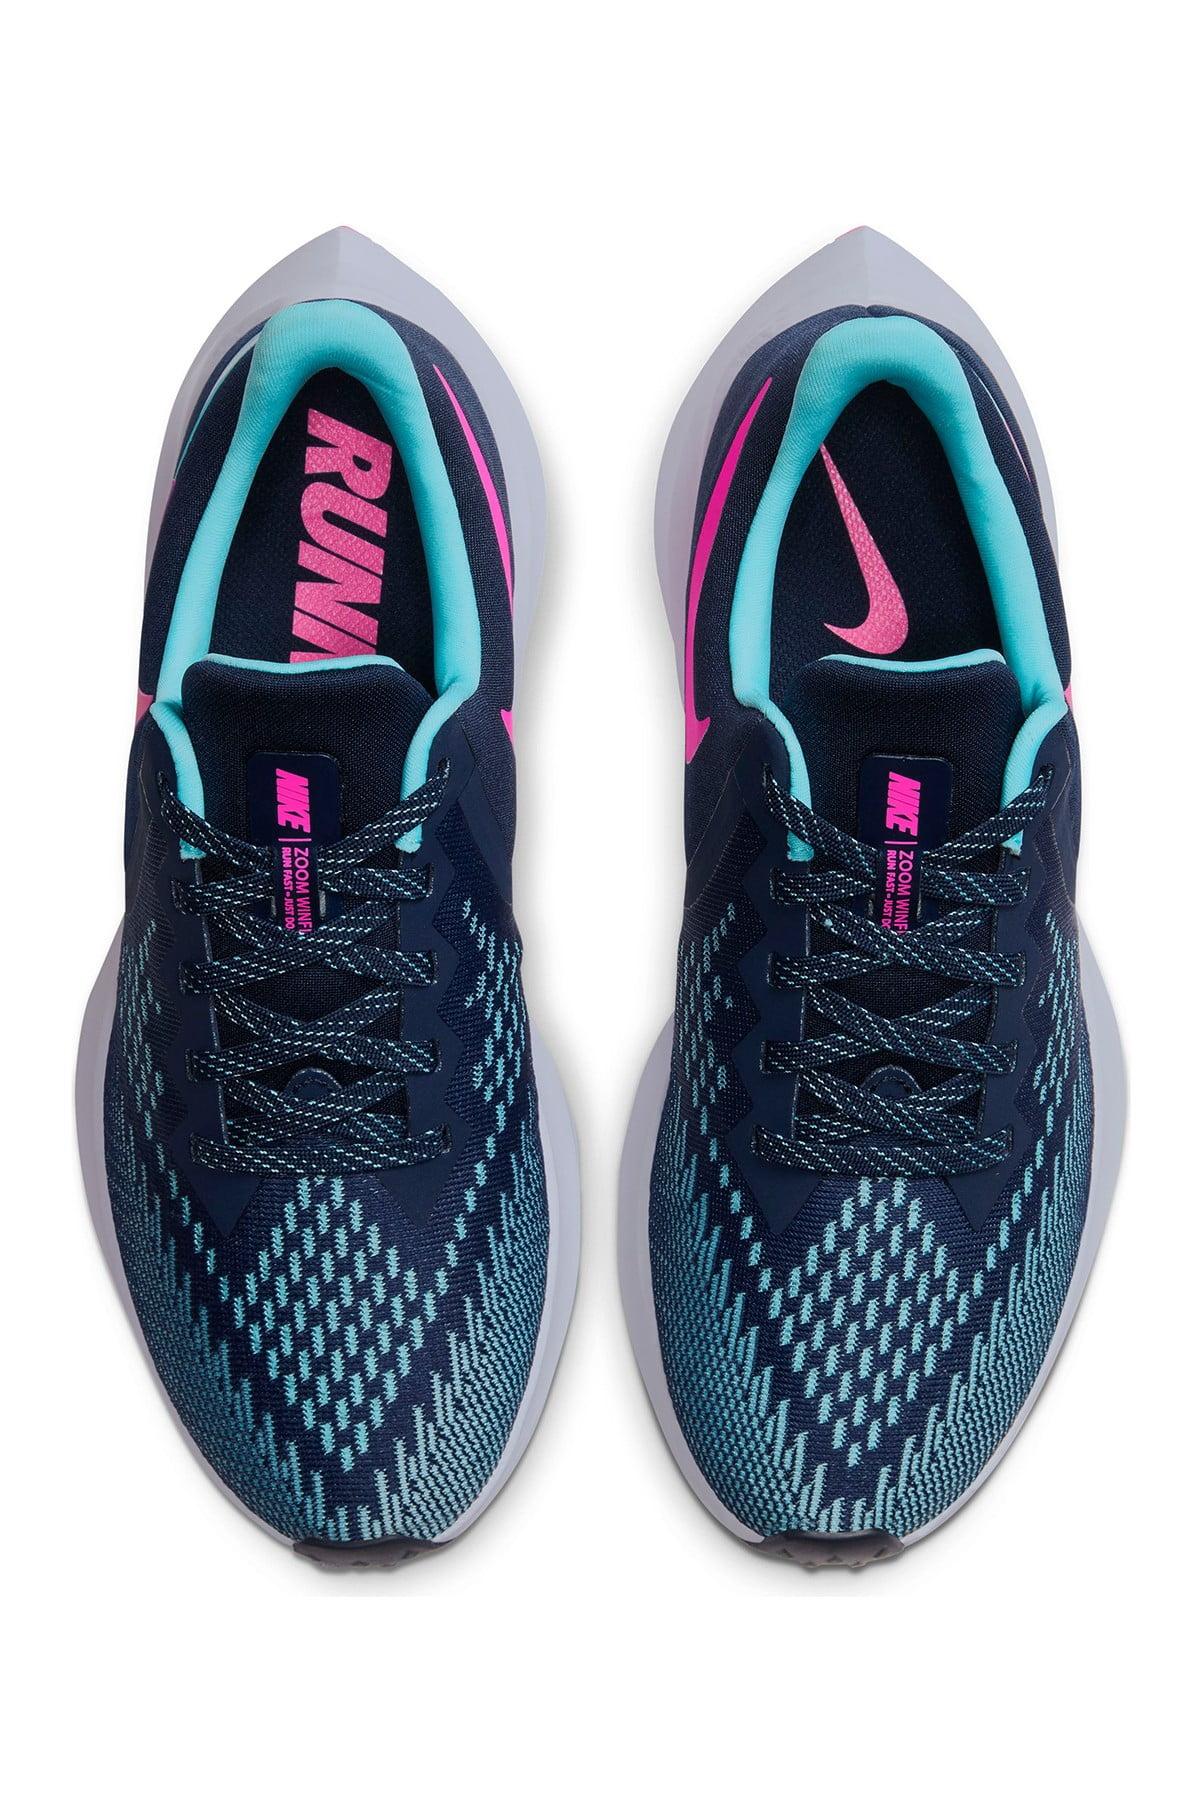 Nike Zoom Winflo 6 Running Shoes in Blue | Lyst